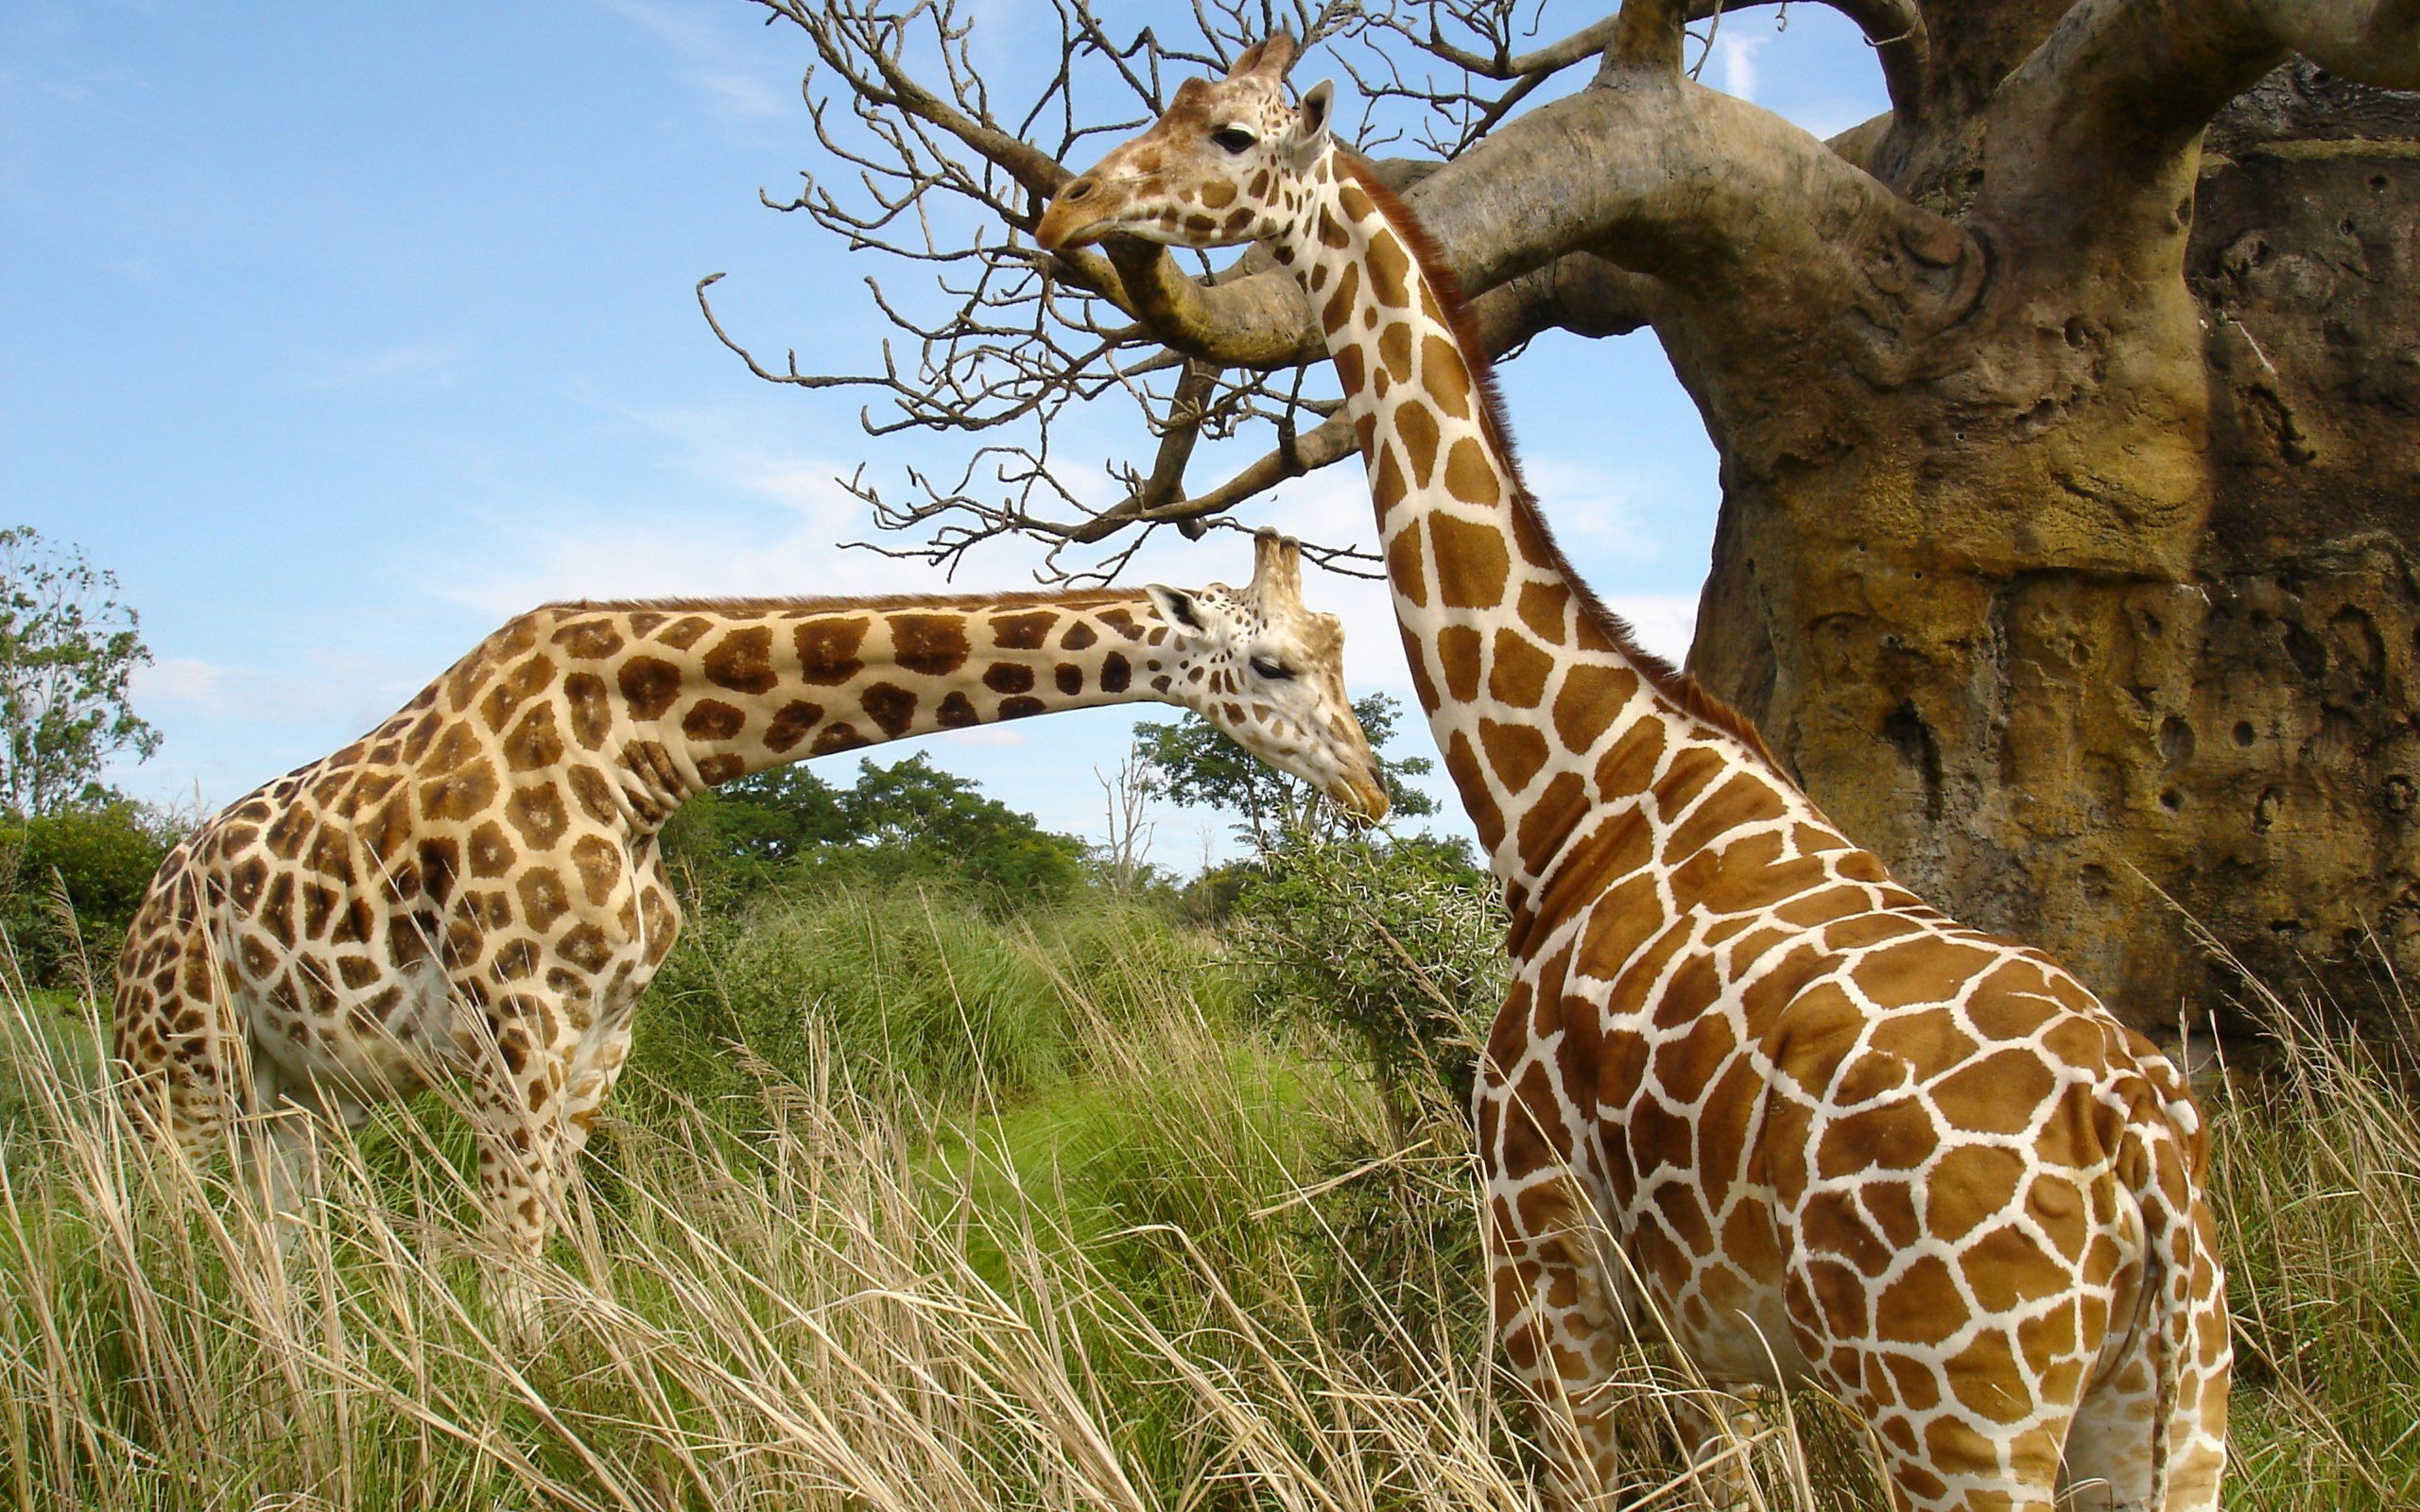 2560x1600 Click here to download in HD Format >> Giraffe Pair Wallpapers http://